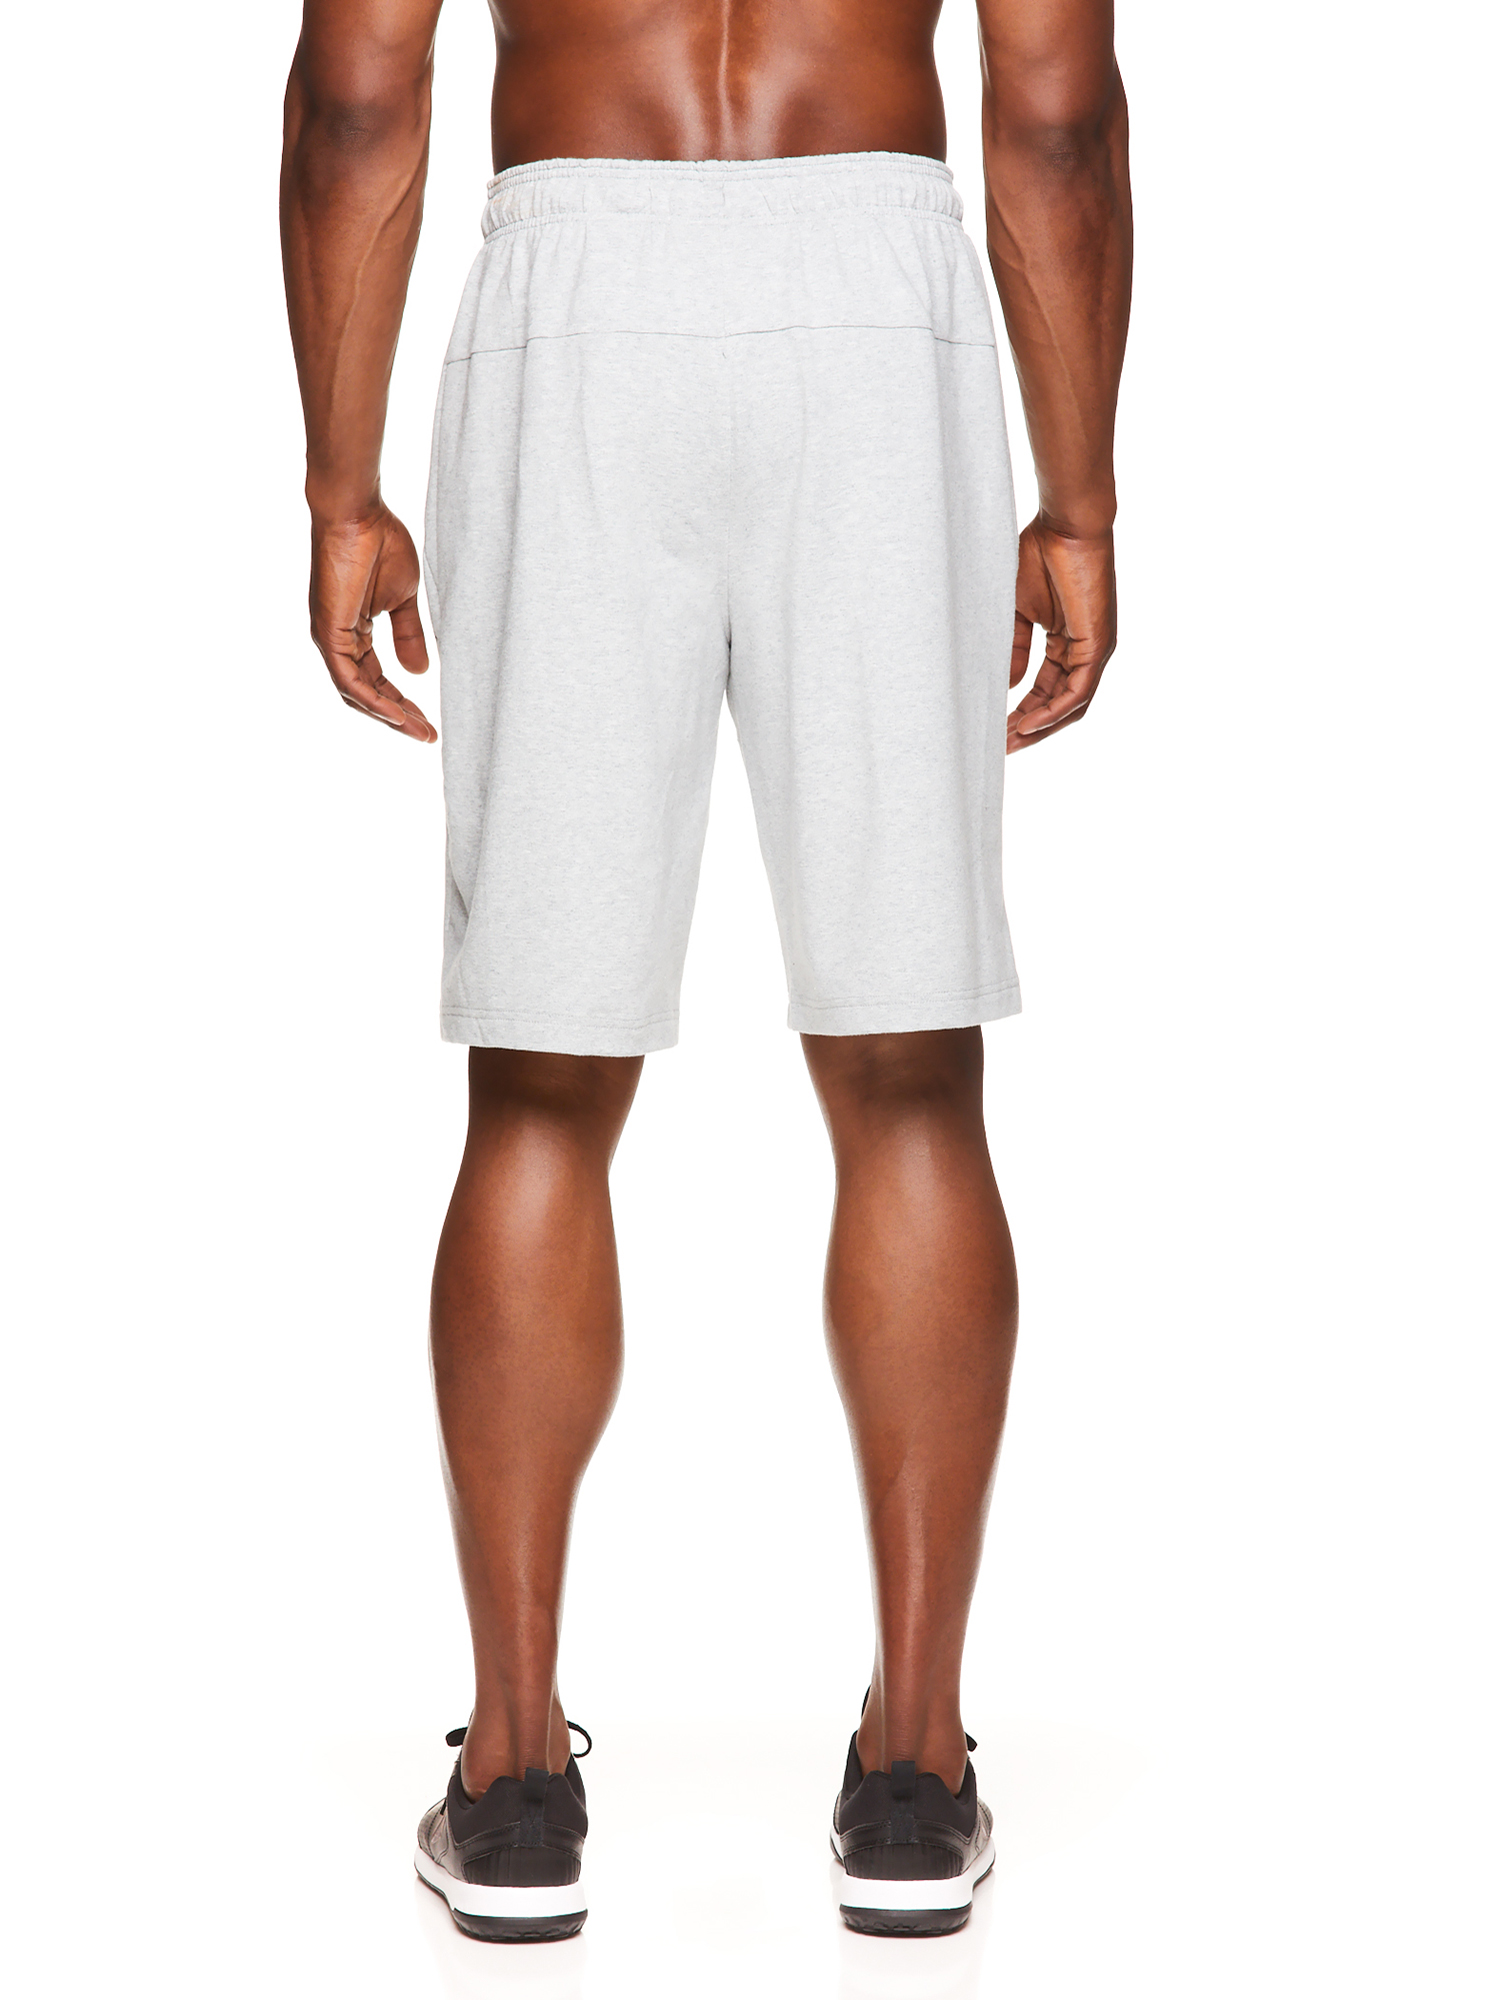 Reebok Men's and Big Men's Active Tech Terry Shorts, 10" Inseam Basketball Shorts, up to Size 3XL - image 4 of 4